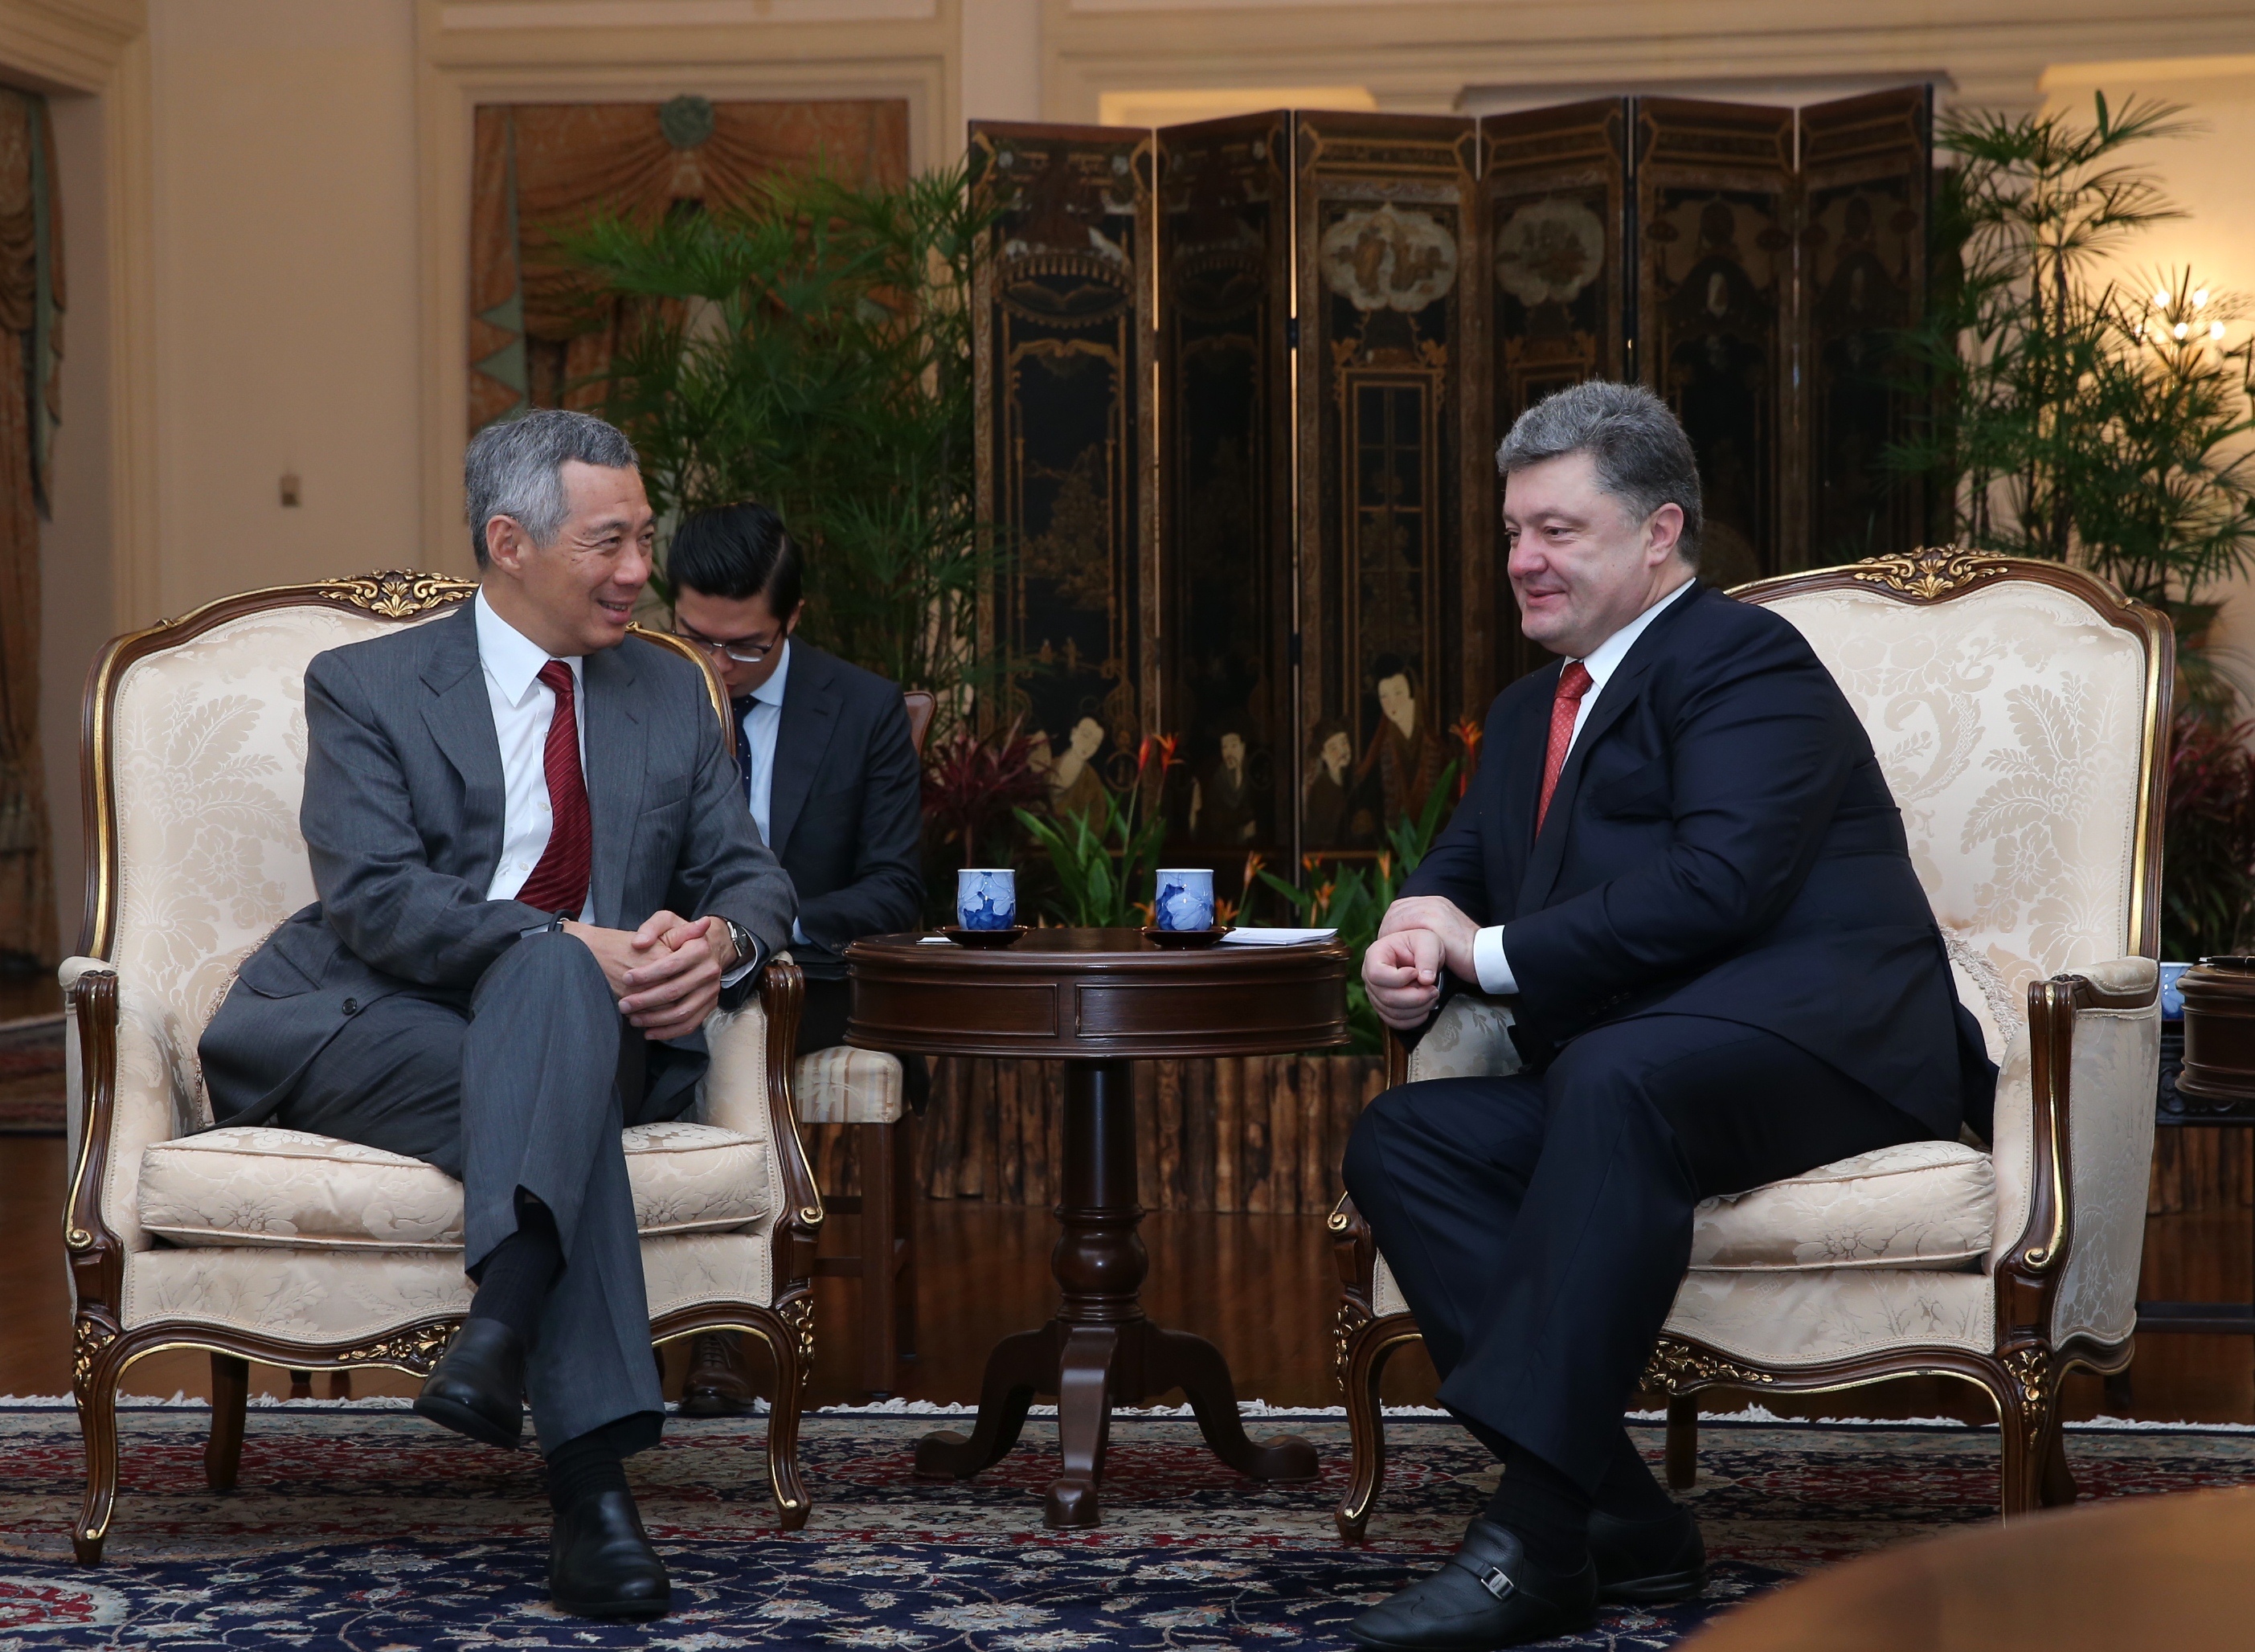 President of Ukraine Petro Poroshenko called on Prime Minister Lee Hsien Loong at the Istana on 9 Dec 2014 (PMO Photo by Alex Qiu)